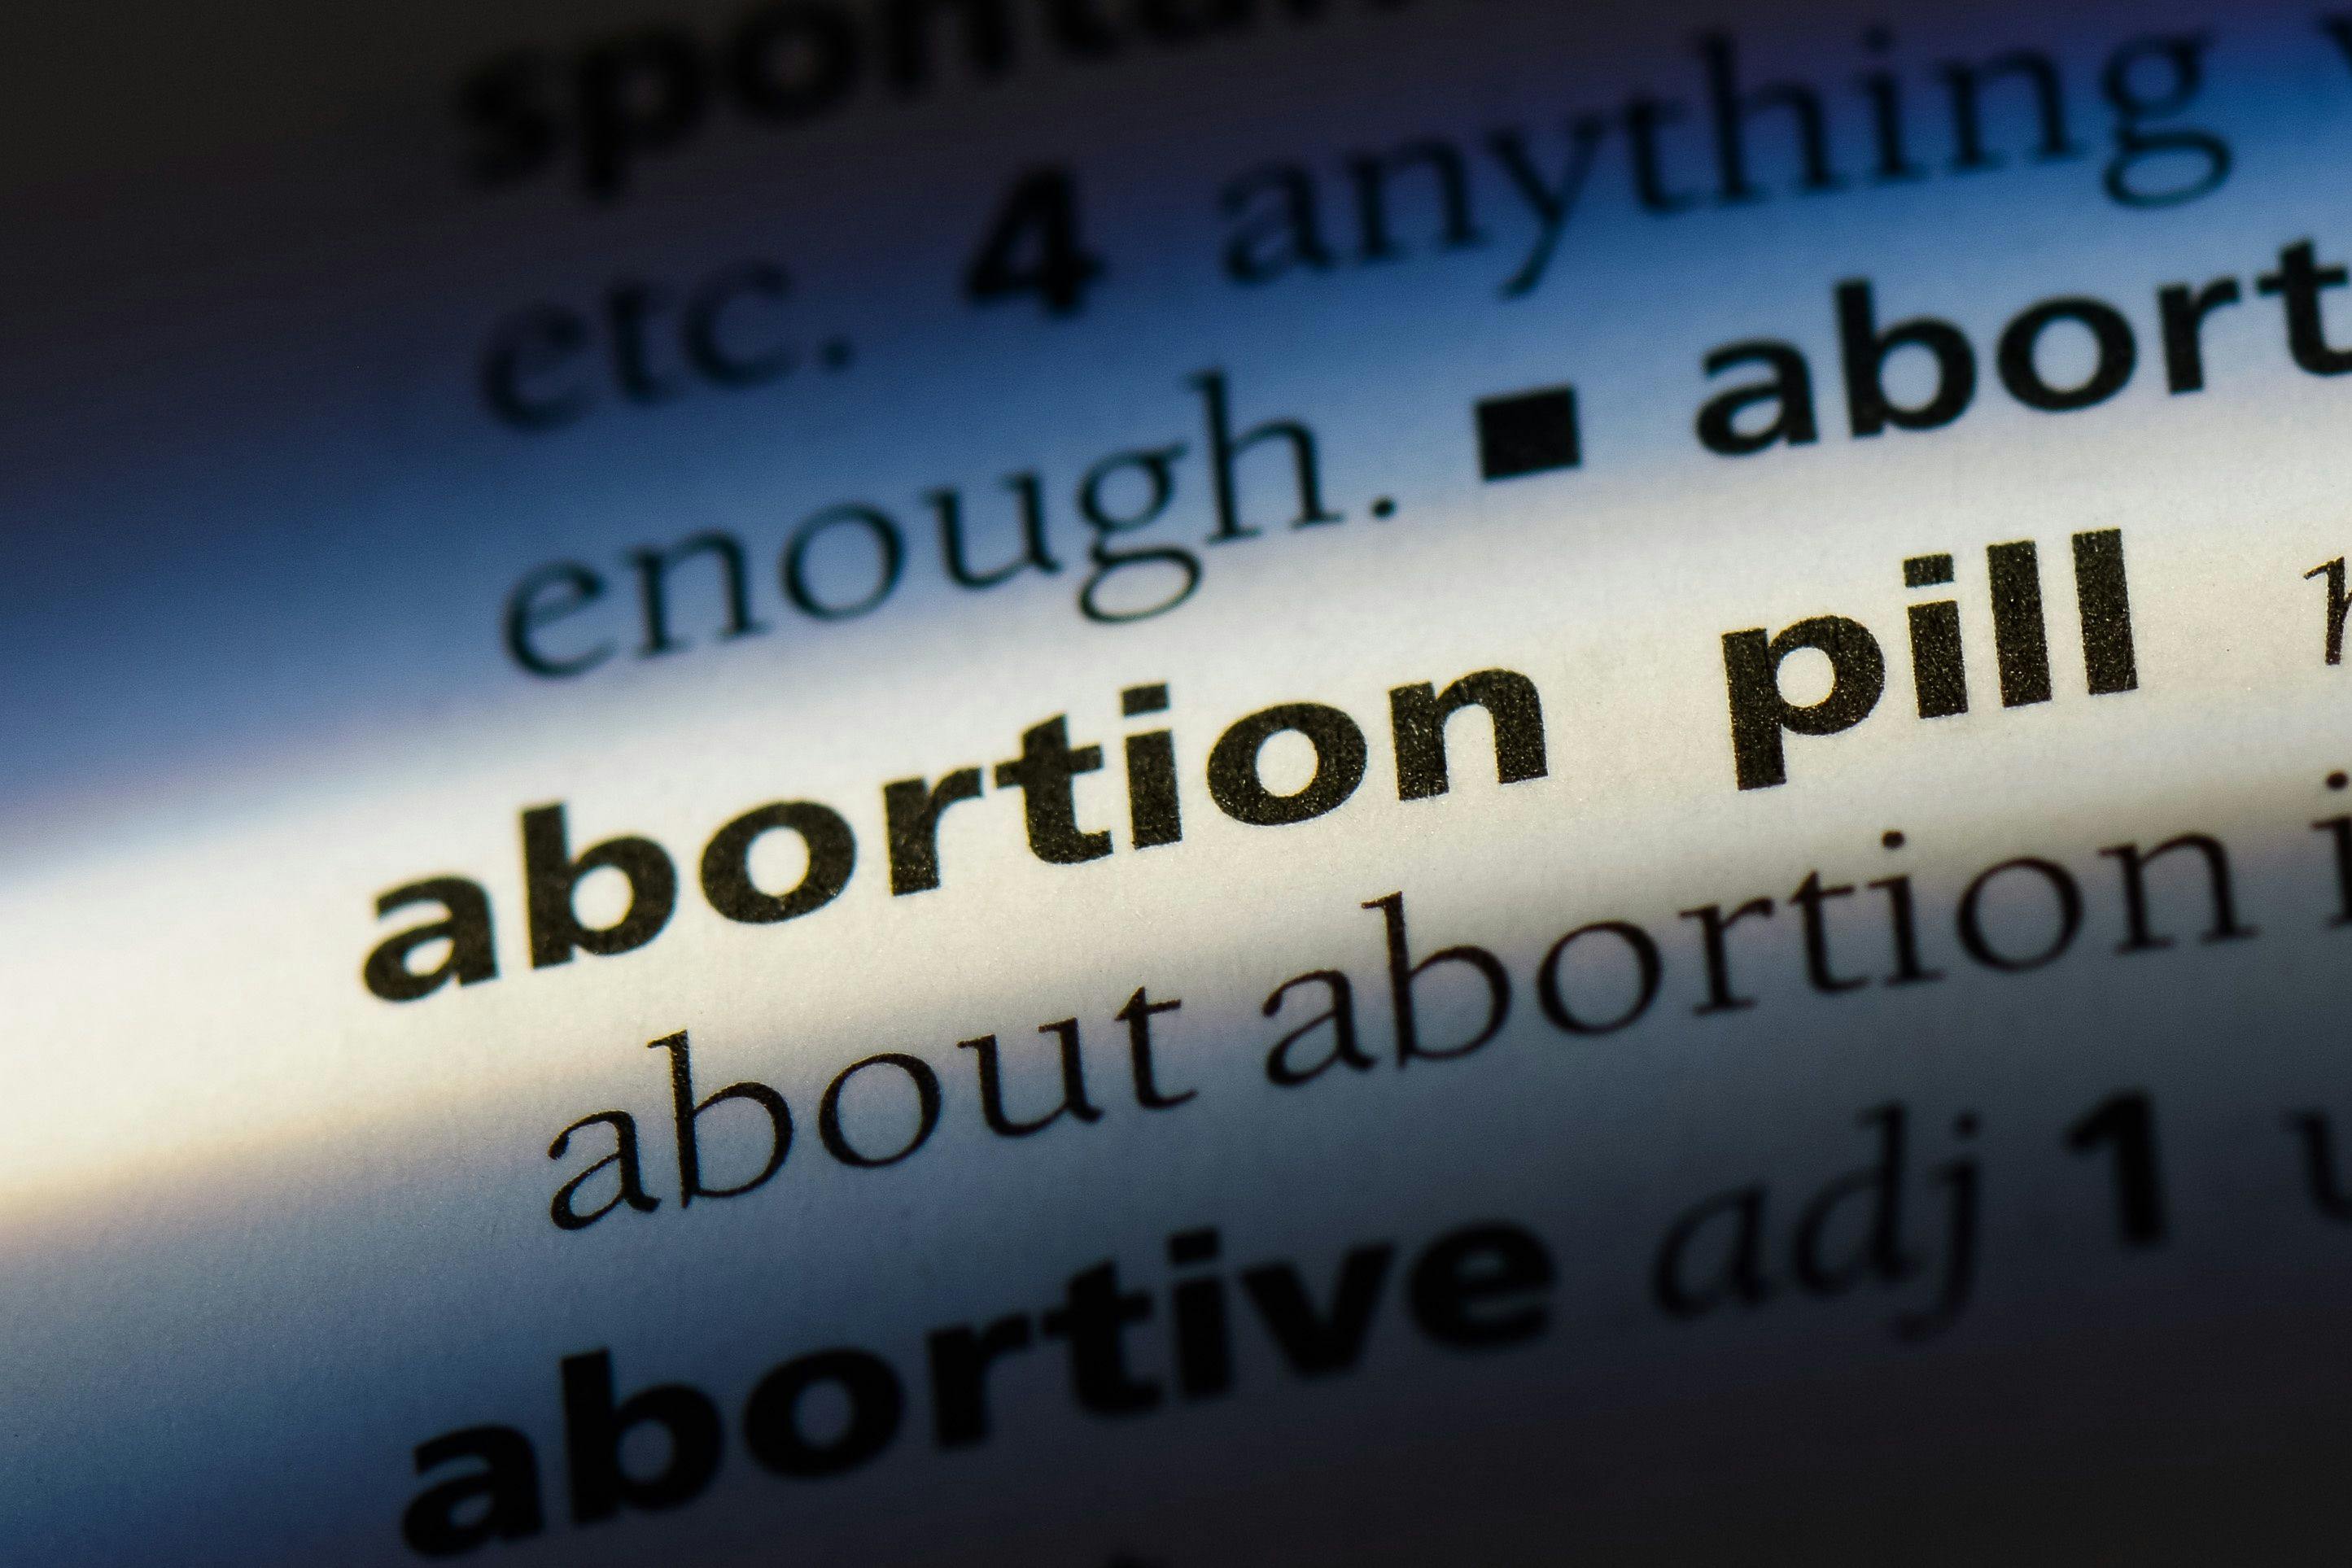 'Abortion pill' as listed in dictionary / Casimiro - stock.adobe.com